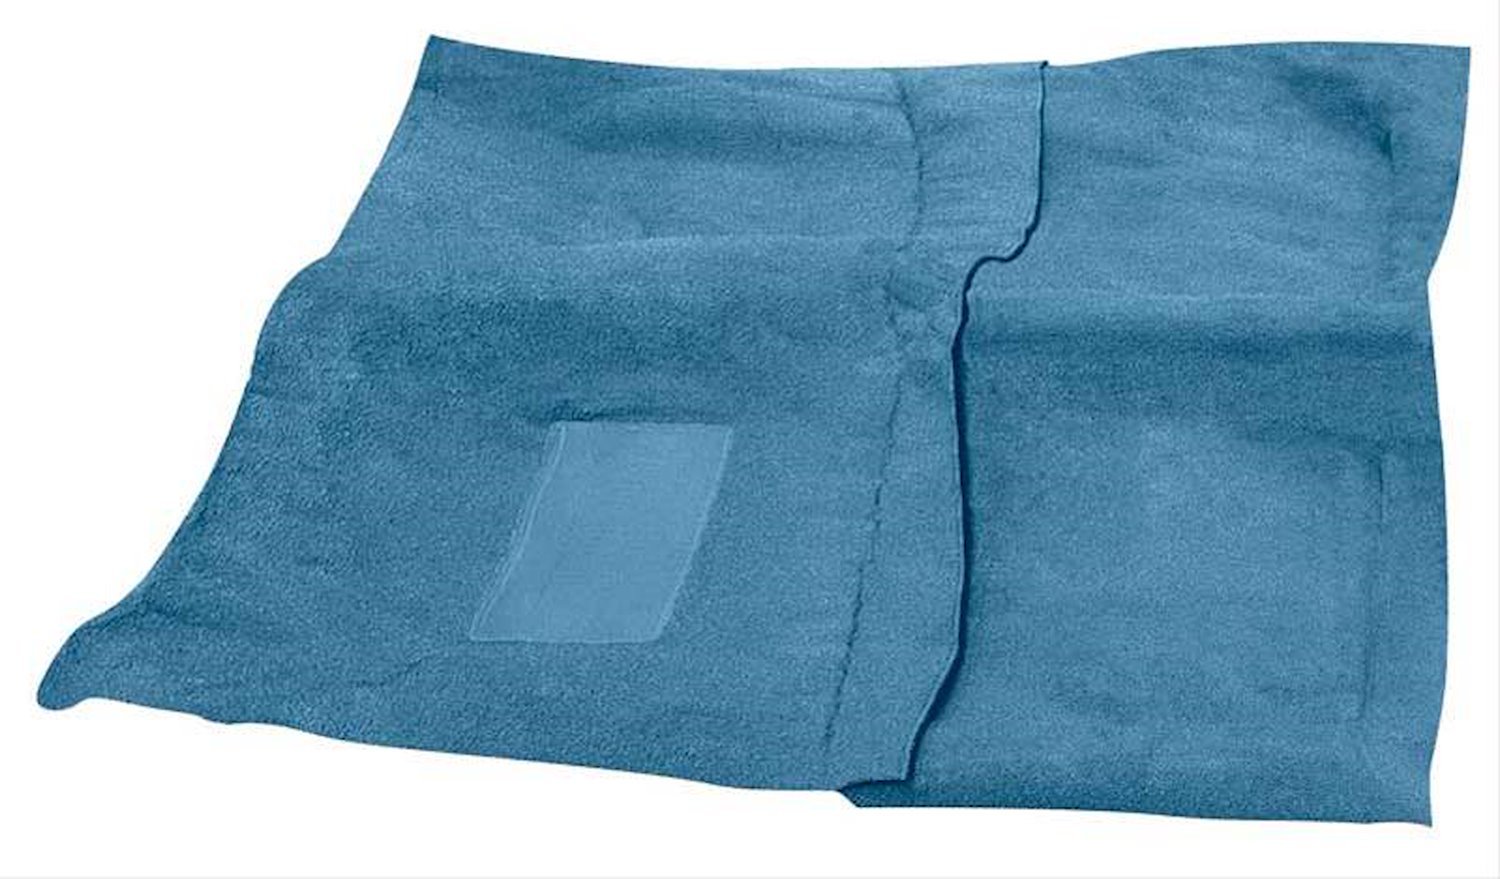 MA530509 Loop Carpet With Tails 1967-69 Dodge Dart Convertible With 4-Speed Medium Blue